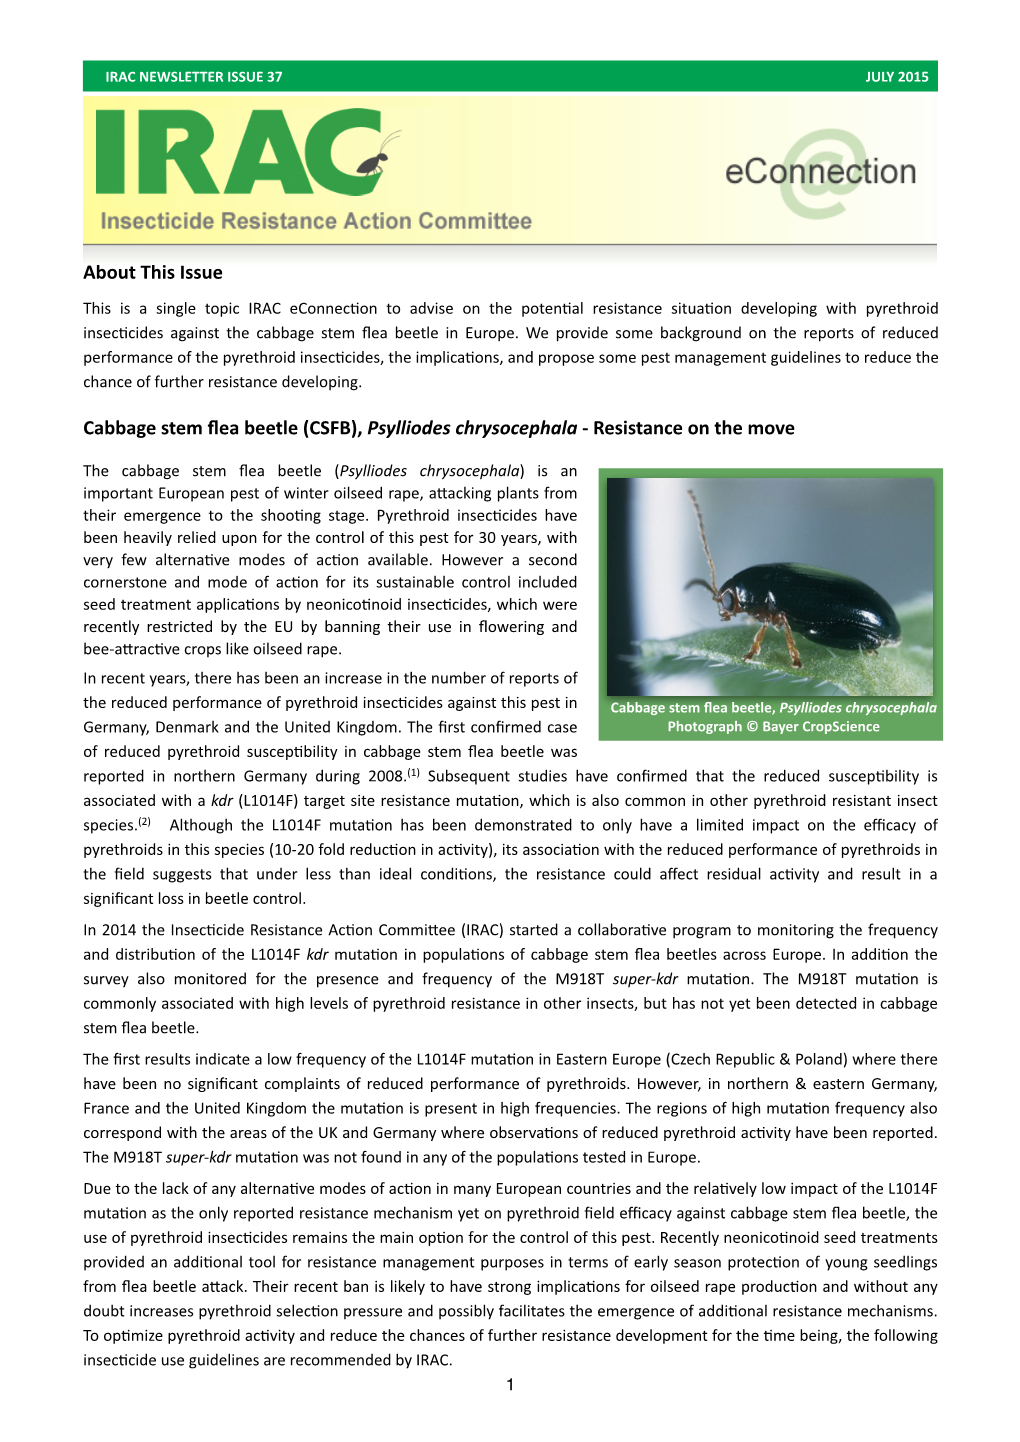 About This Issue Cabbage Stem Flea Beetle (CSFB), Psylliodes Chrysocephala